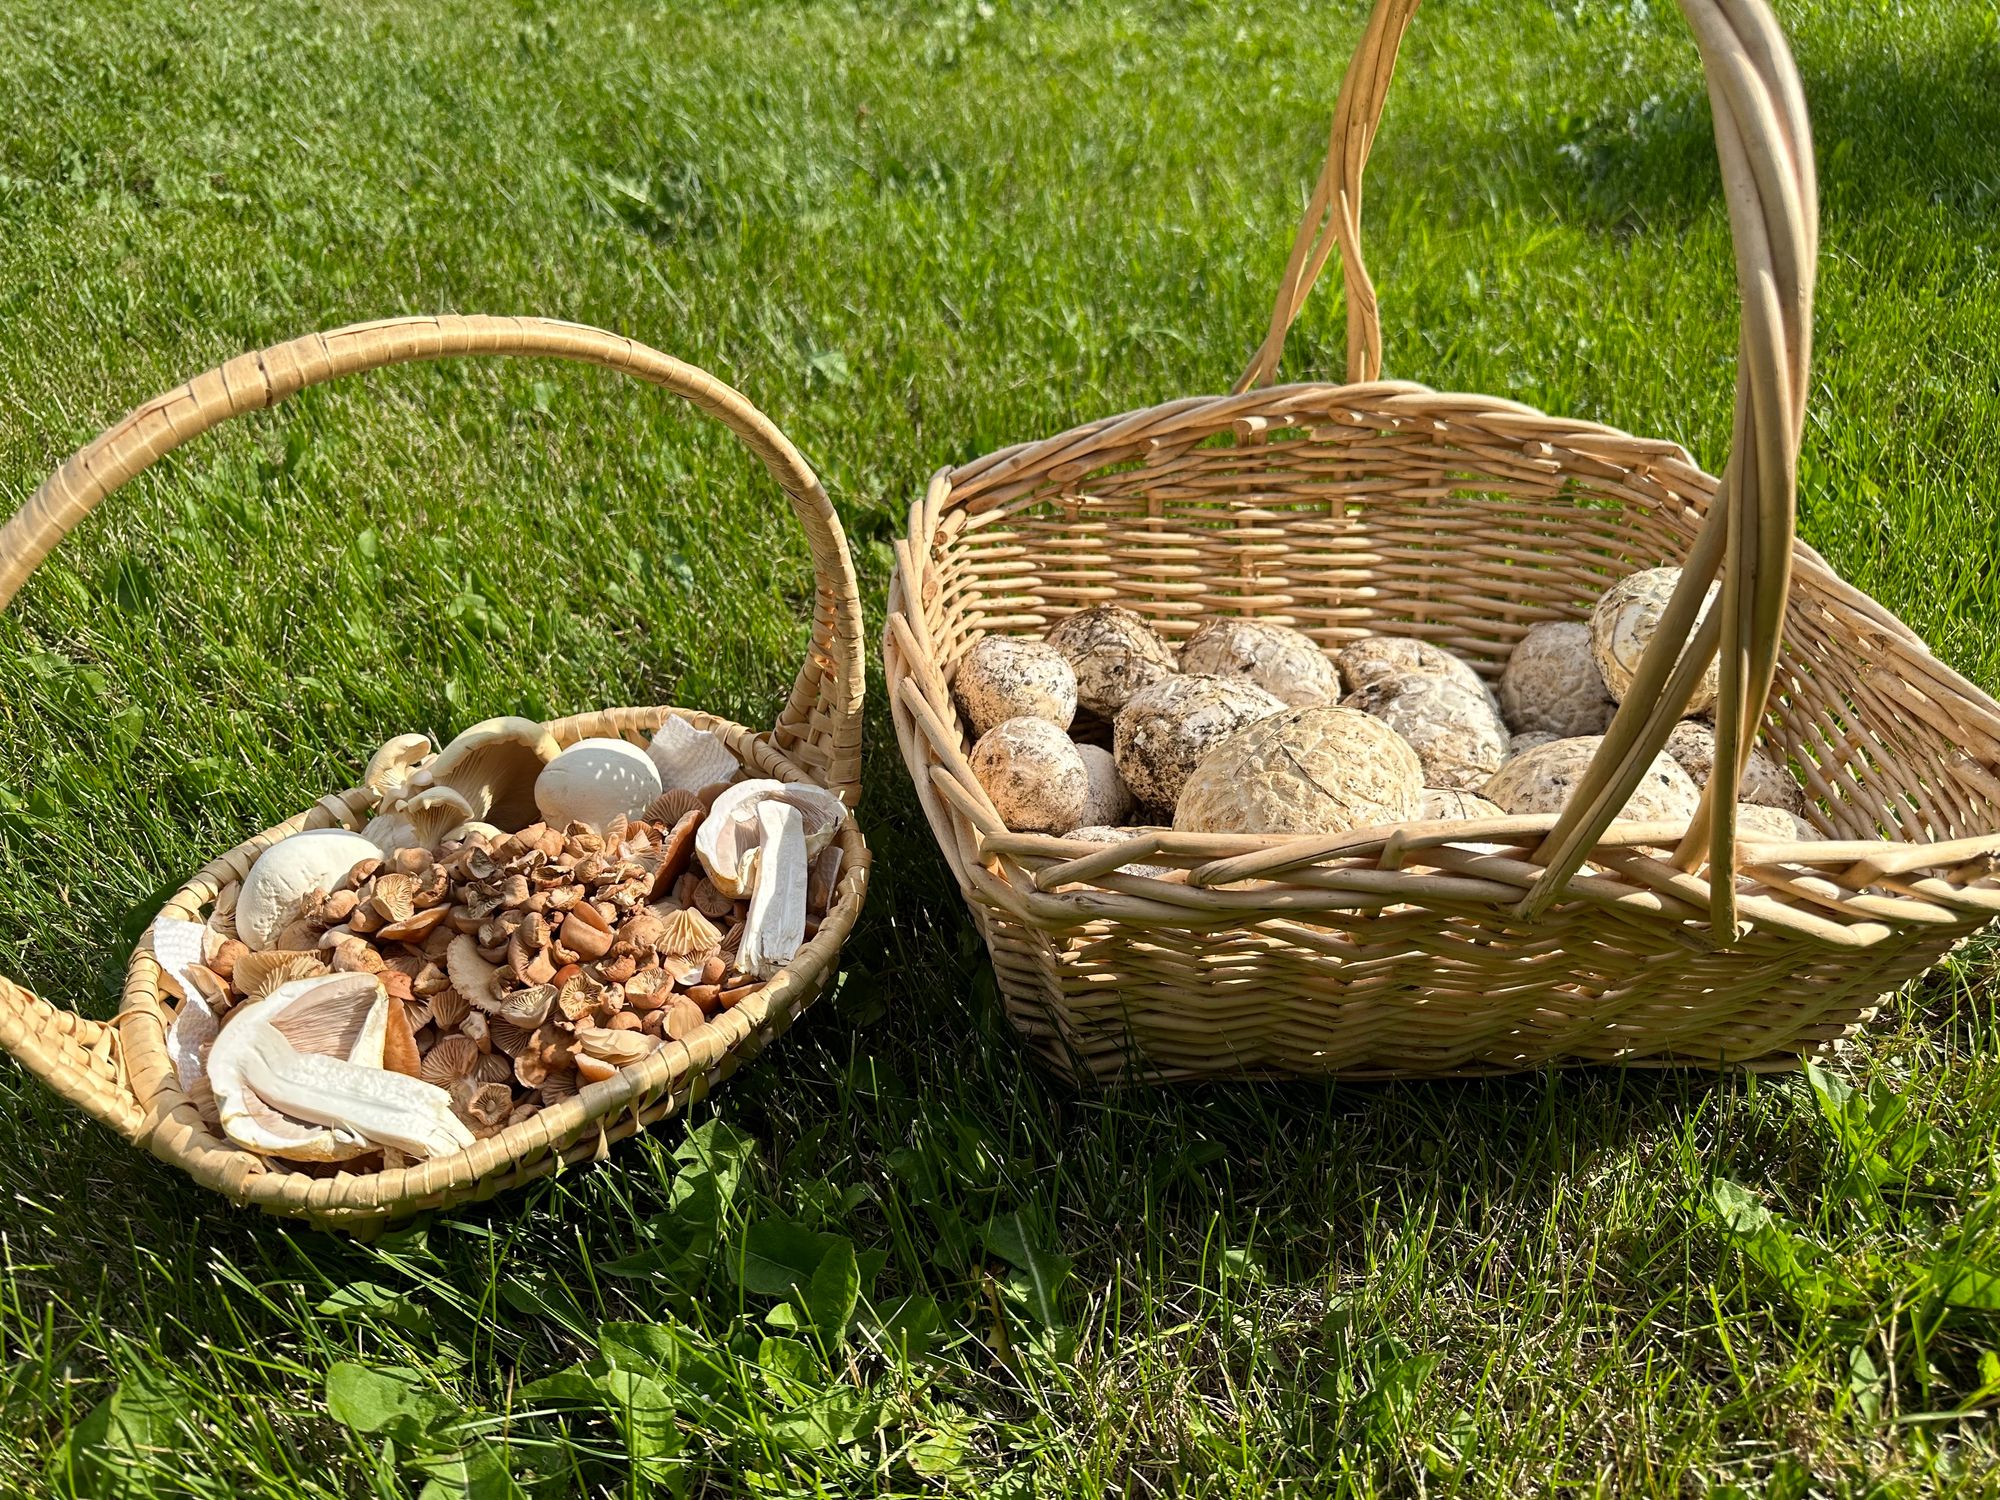 How to Preserve Foraged Mushrooms? Make a Delectable Duxelle!